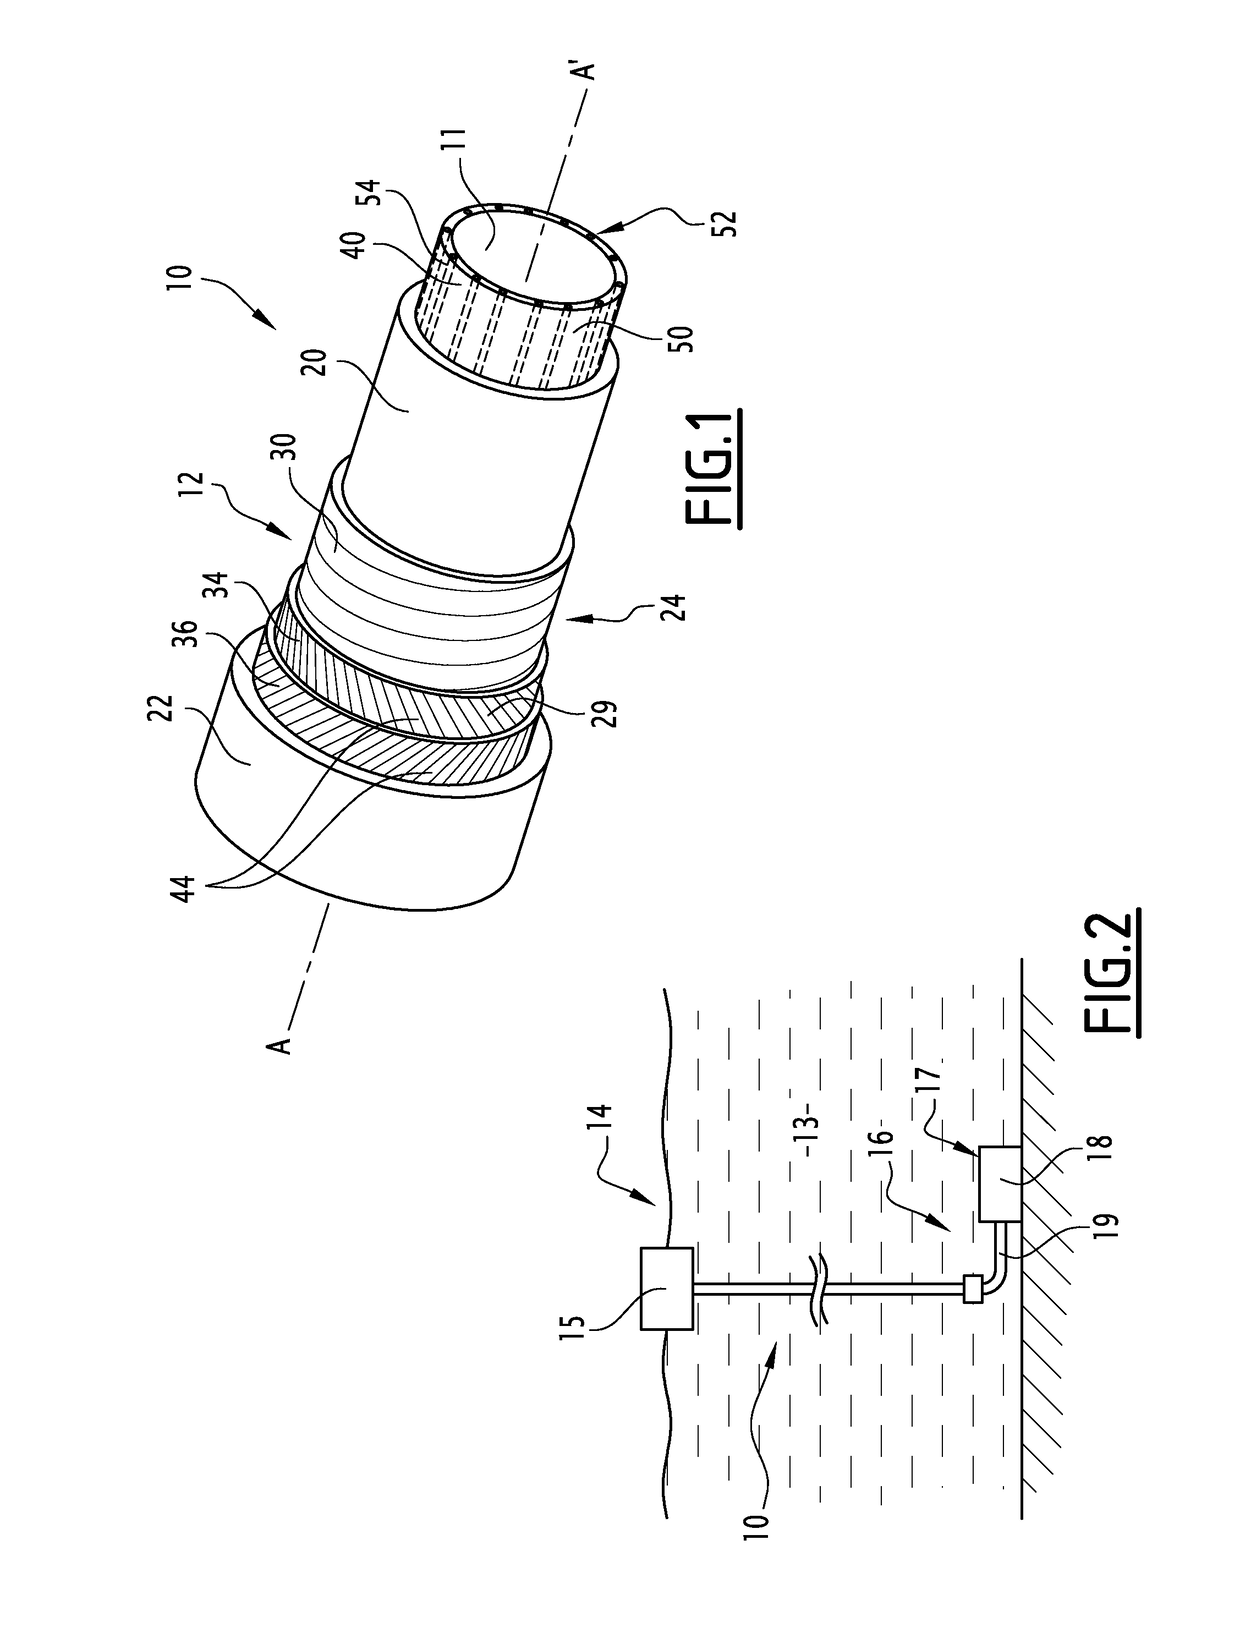 Unbonded flexible pipe for transporting an abrasive material, associated method and associated use